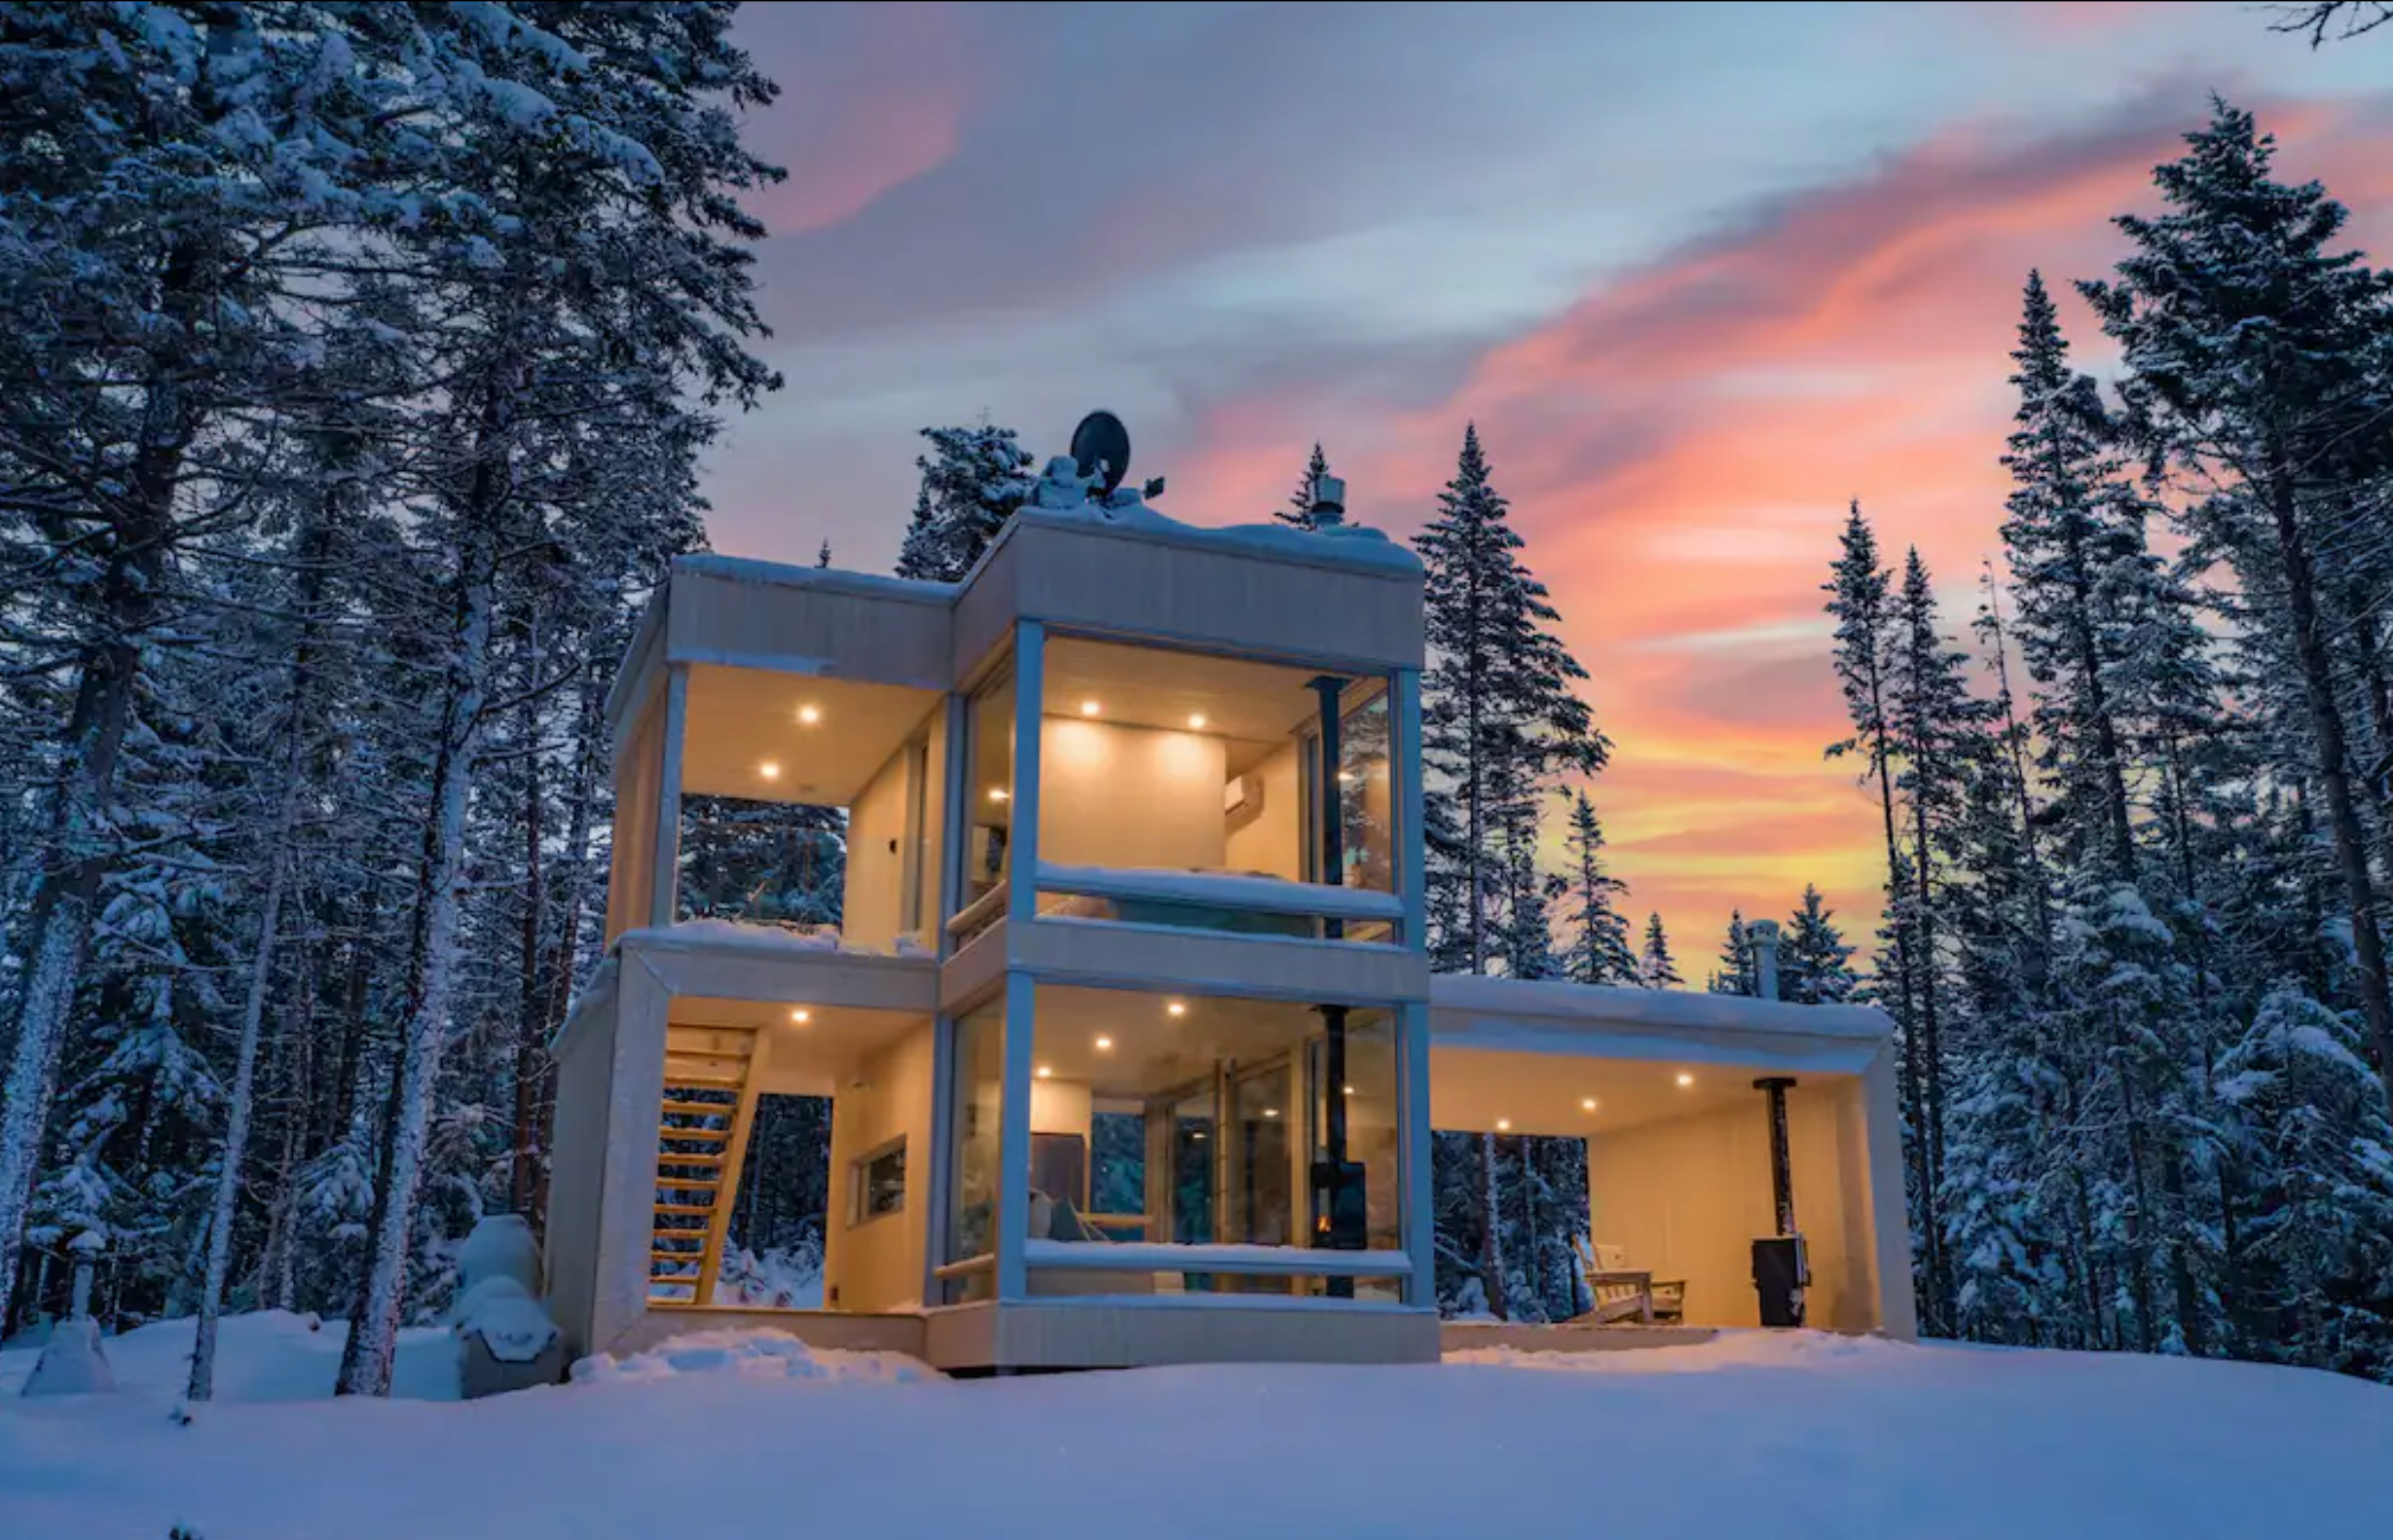 The best part of this stunning tiny home is its remarkable location. Although it’s tucked into its own quiet piece of wilderness, it’s just outside of the heart of Quebec City—allowing you to experience both sides of the French province. The unique tiny home boasts floor-to-ceiling windows with panoramic views of the surrounding nature. A queen bed and set of bunk beds make up the sleeping arrangements, and central heating alongside a gas fireplace keeps the place toasty and warm. There’s also a covered space for outdoor fires and snowshoeing available on the property. Keep in mind, the only ways to navigate between the upstairs and downstairs are the indoor ladder and outdoor staircase. $284, Airbnb (starting price). <a href="https://www.airbnb.com/rooms/46695796">Get it now!</a><p>Sign up to receive the latest news, expert tips, and inspiration on all things travel</p><a href="https://www.cntraveler.com/newsletter/the-daily?sourceCode=msnsend">Inspire Me</a>